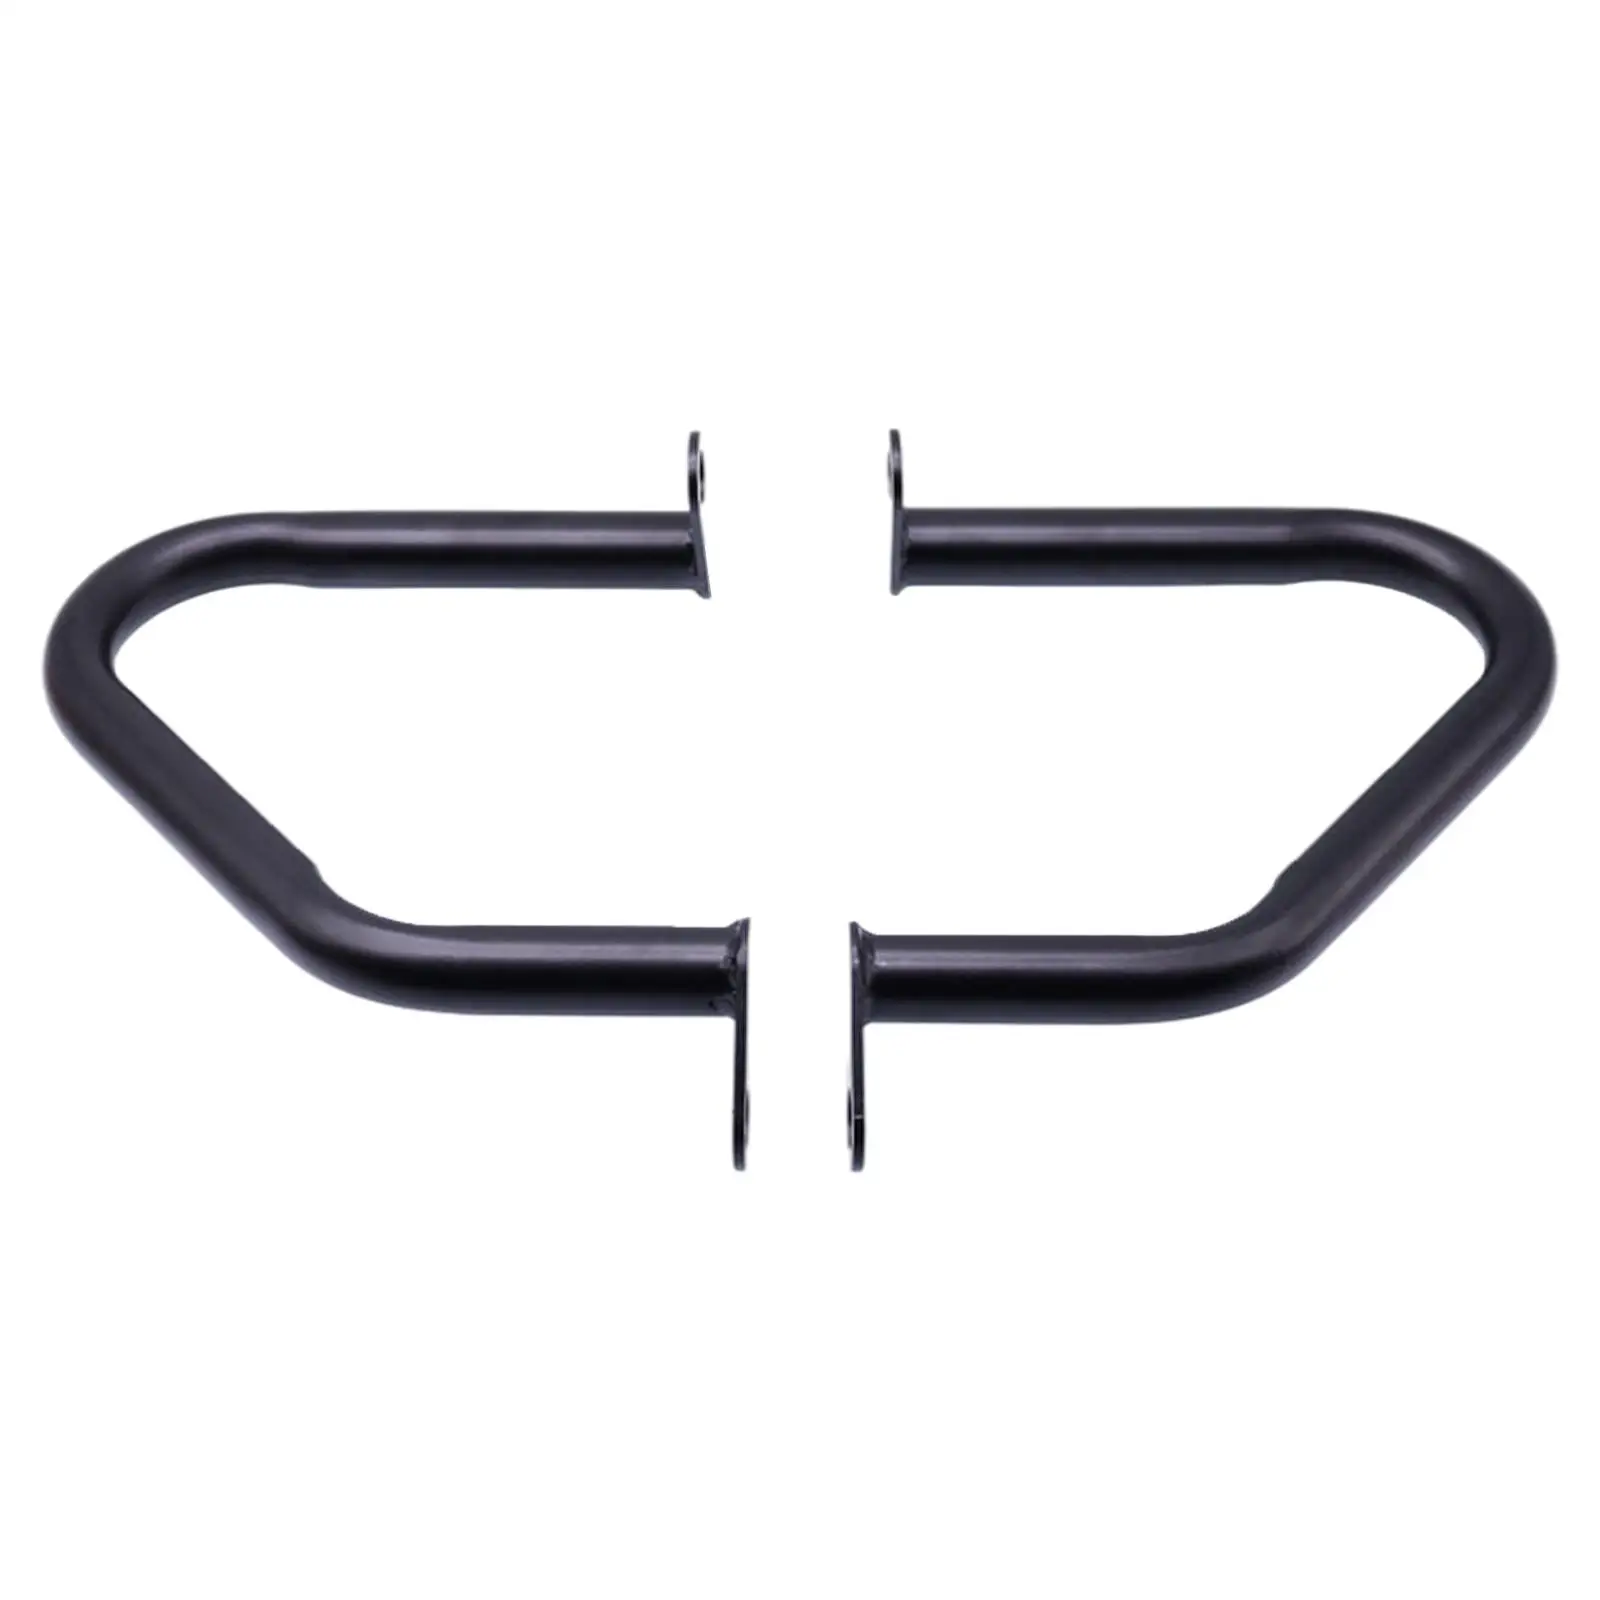 Engine Guard Crash Bars Replaces for T120  Durable Professional